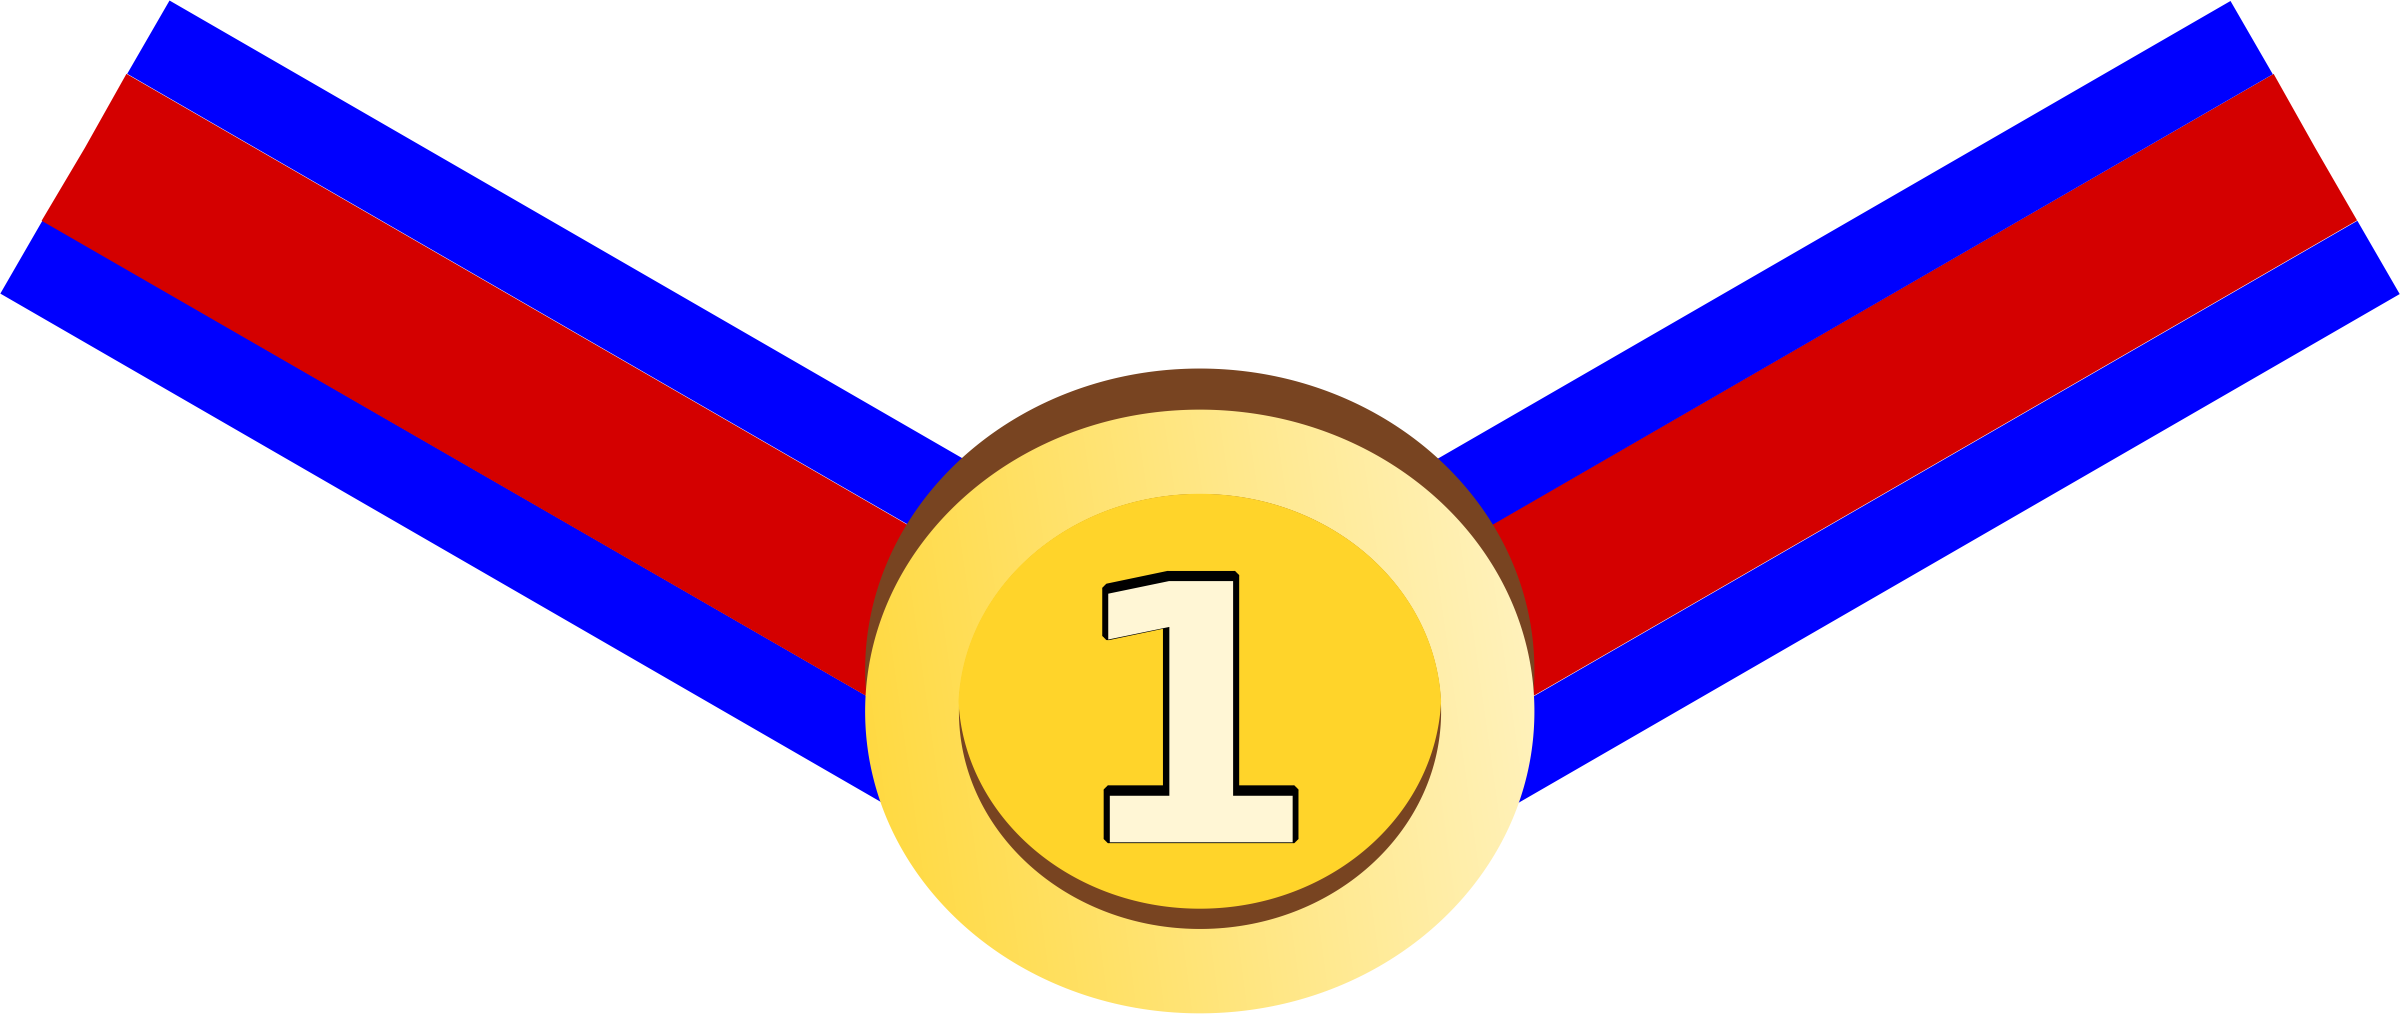 clipart images of medals - photo #38